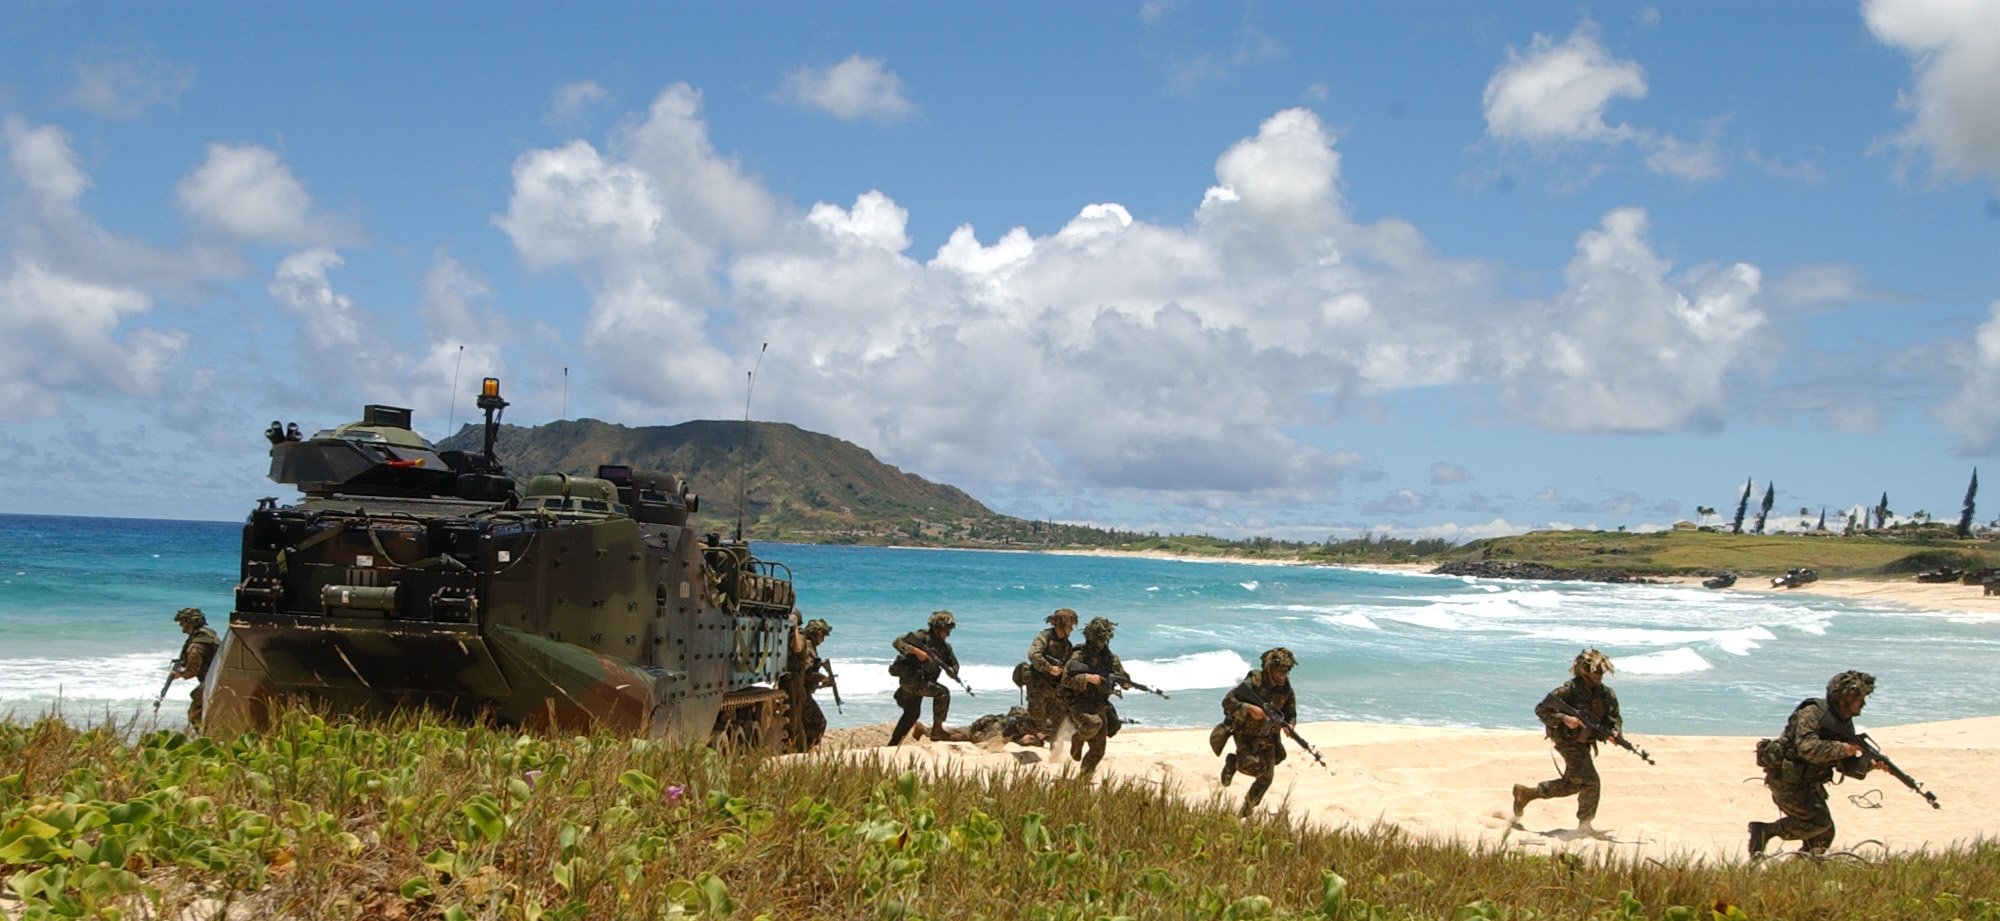 U.S. Marines in exercise at Marine Corps Base Hawaii, 2004. (United States Navy photo by Photographer's Mate 1st Class Jane West)